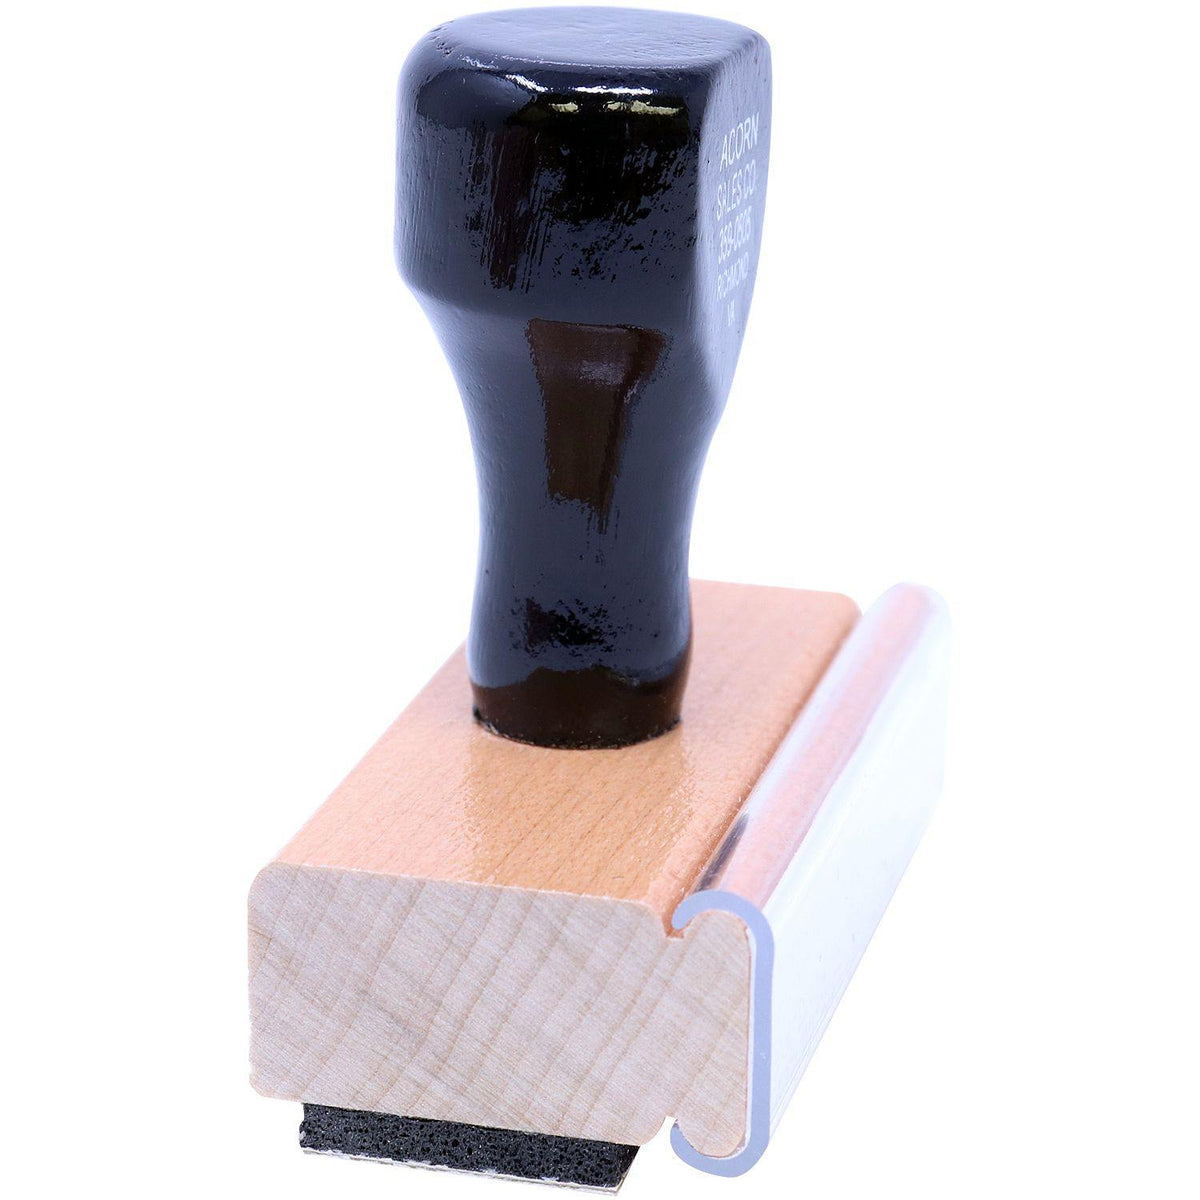 Side View of Large Confirmation of Phone Order Rubber Stamp at an Angle